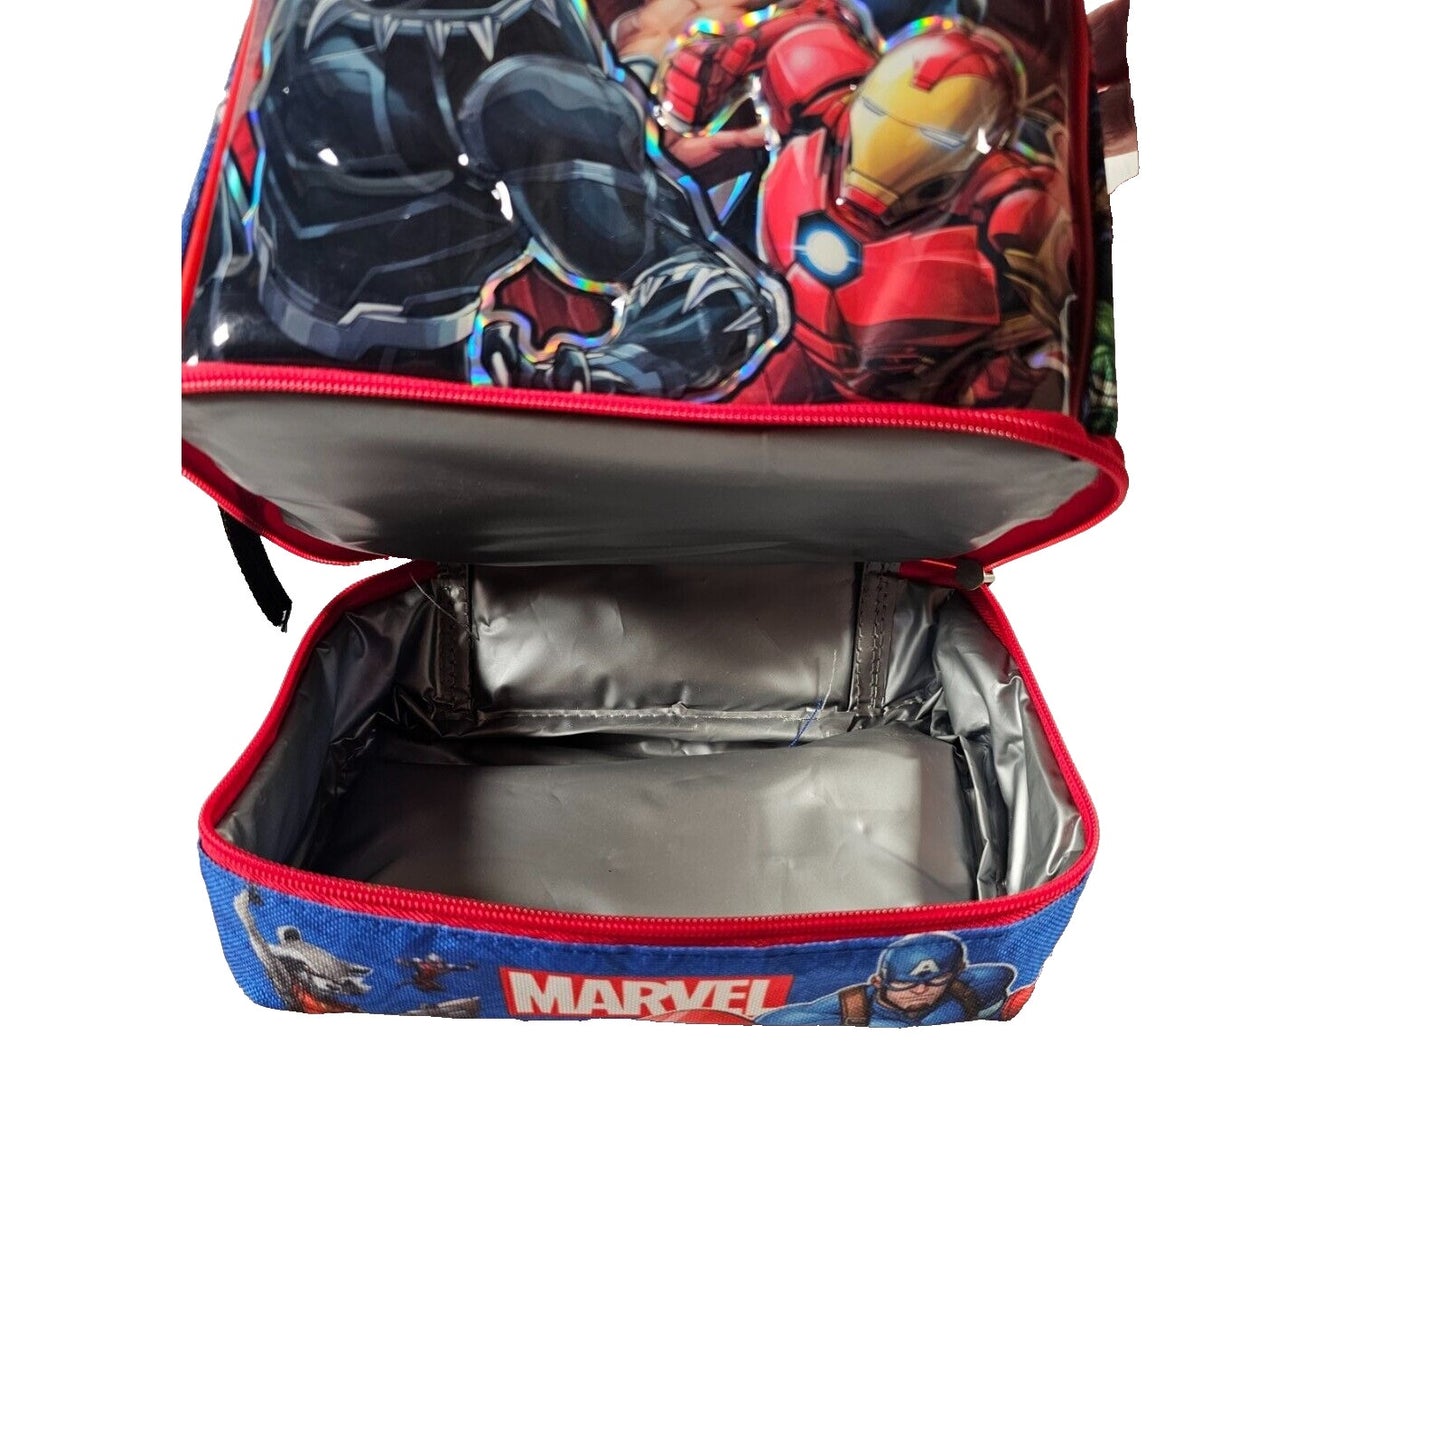 Marvel Avengers, Soft Insulated Dual Compartment Lunch Box